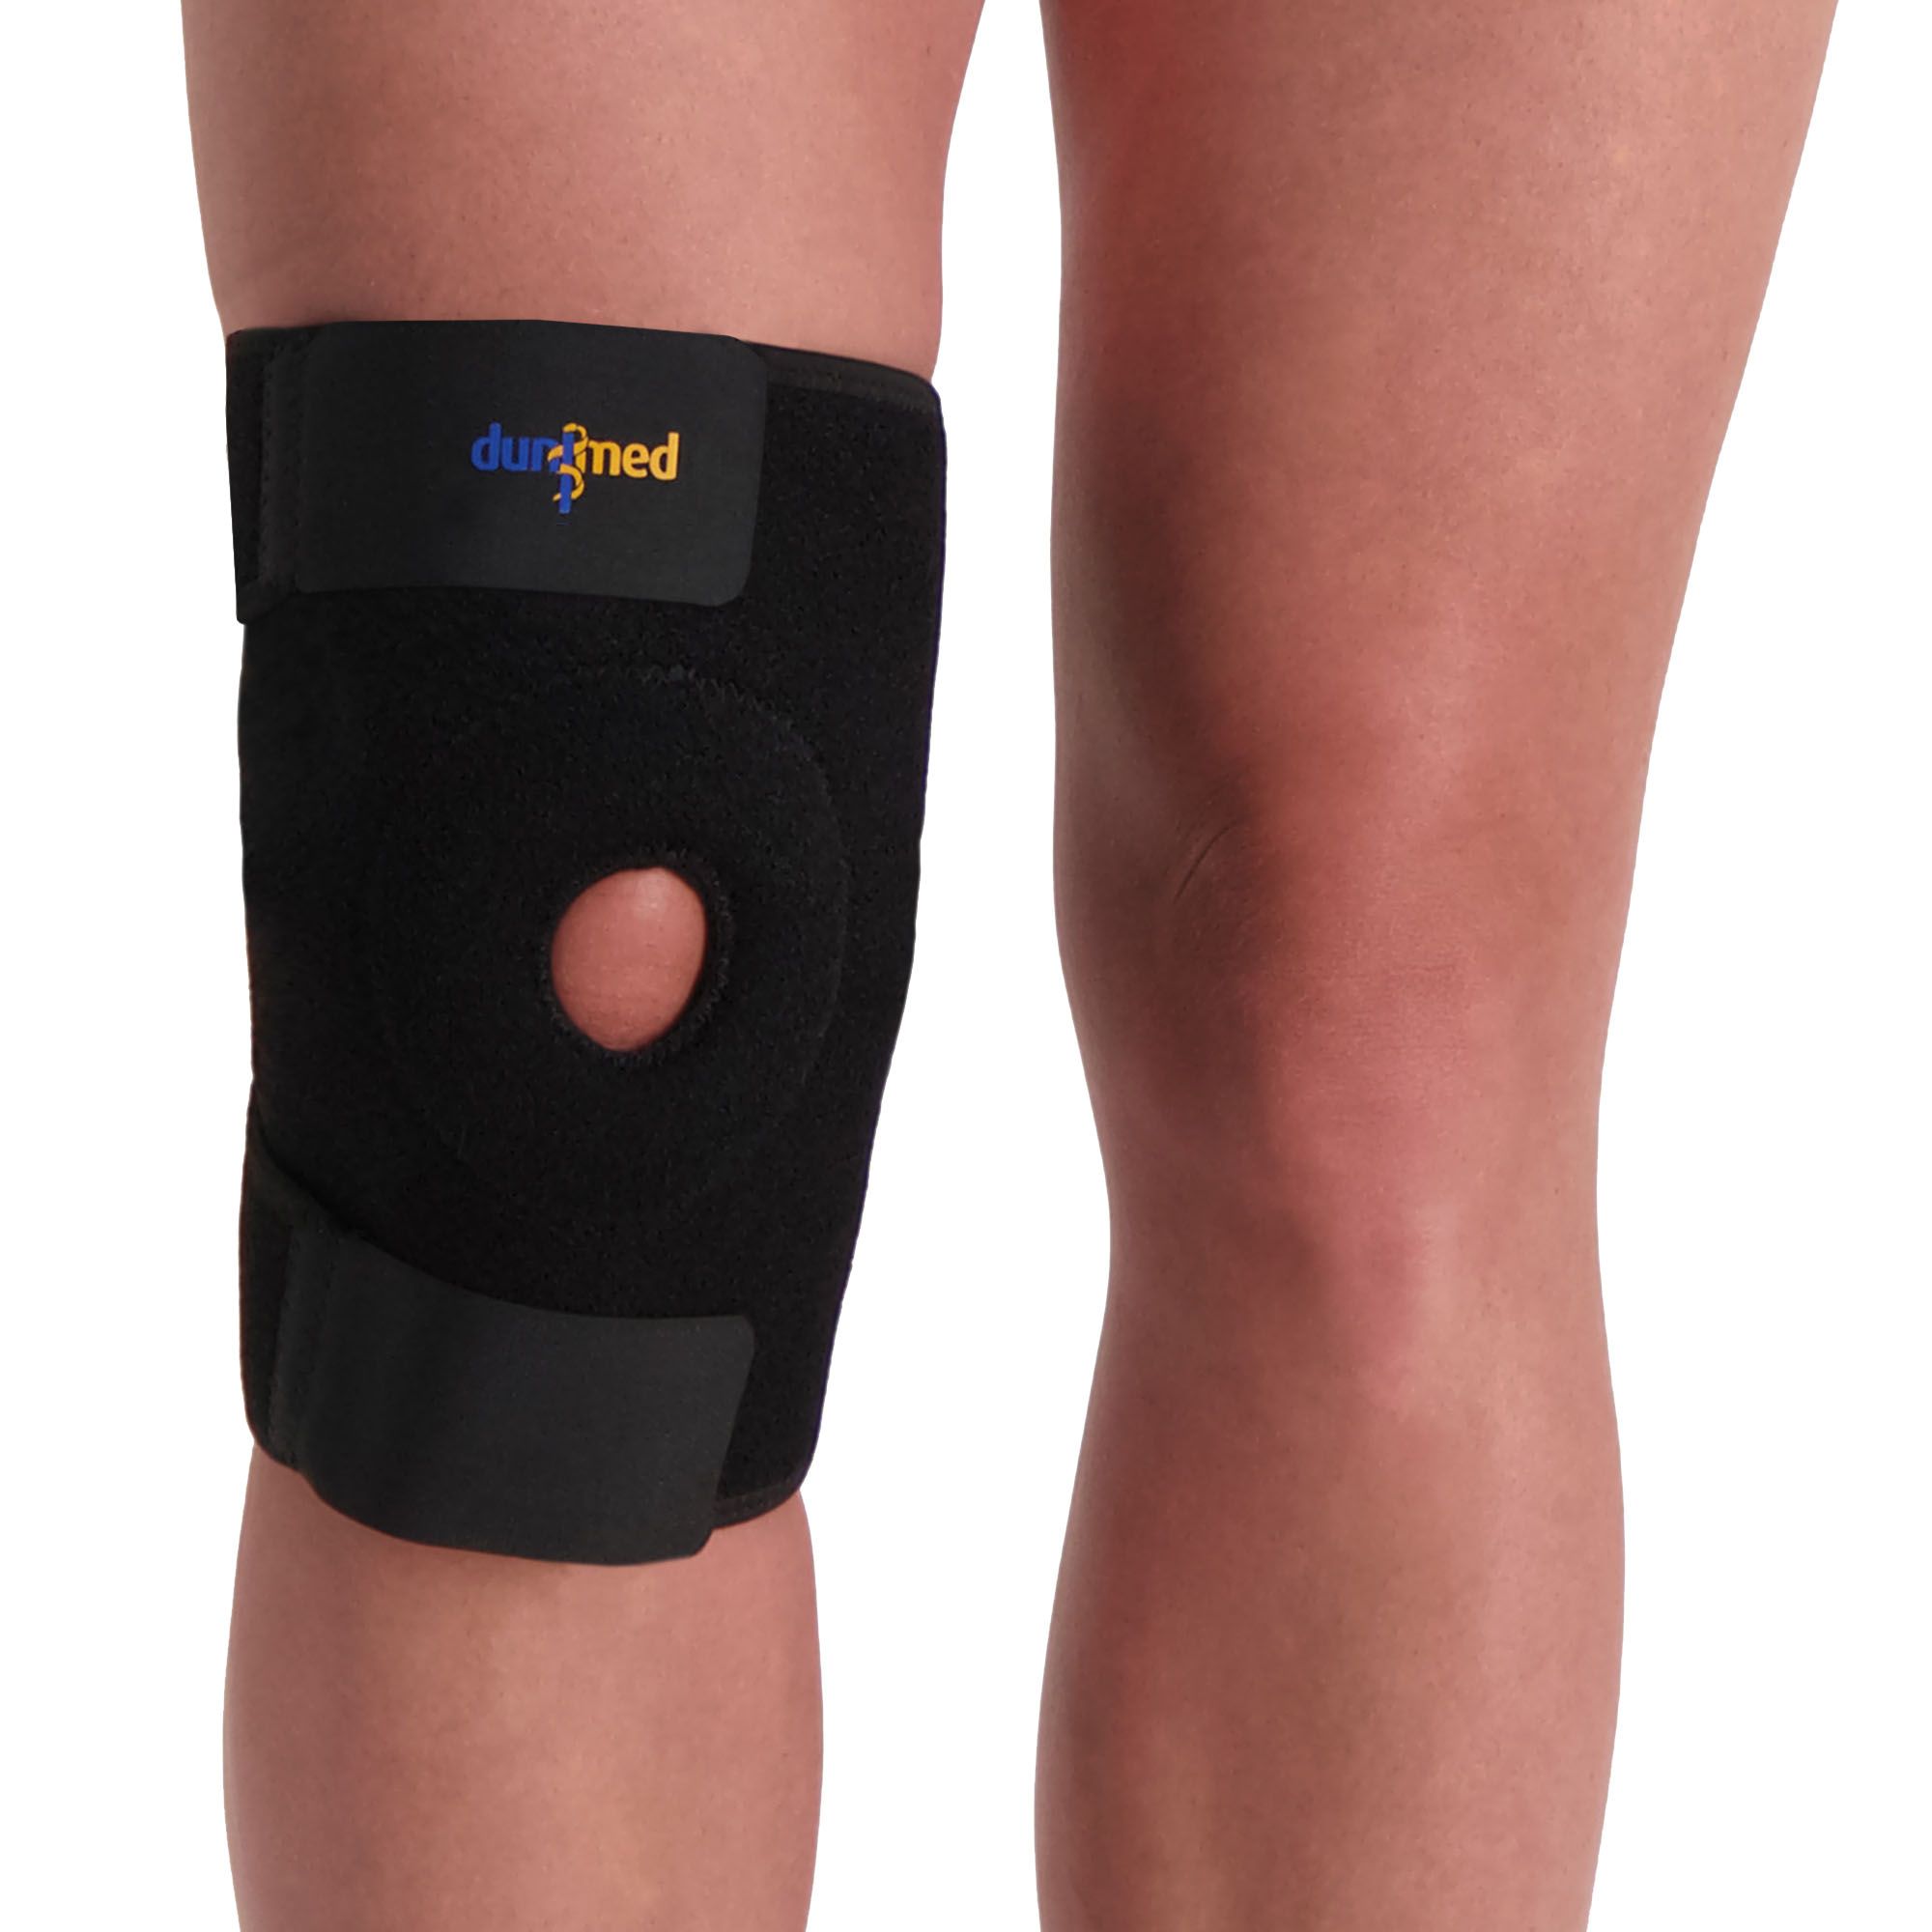 dunimed knee support wrap